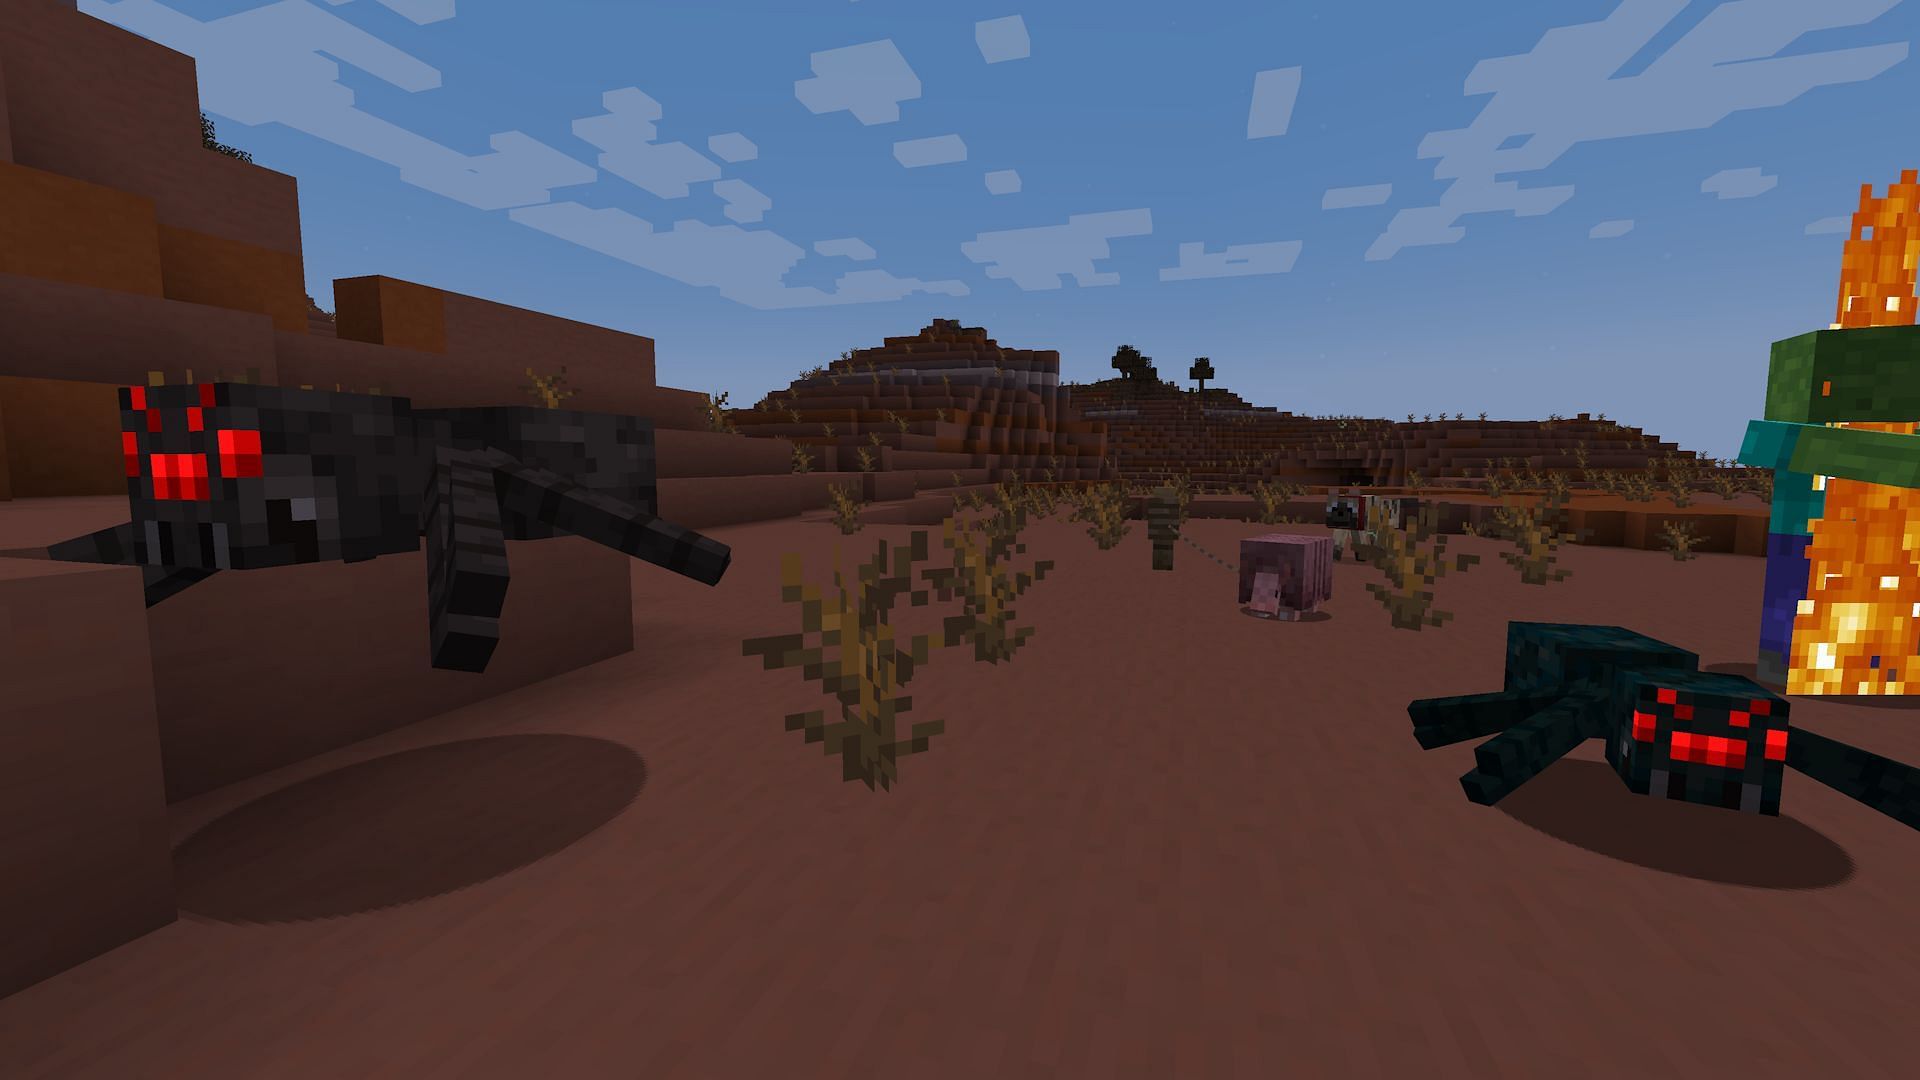 Armadillos also have the added benefit of scaring off spiders (Image via Mojang Studios)